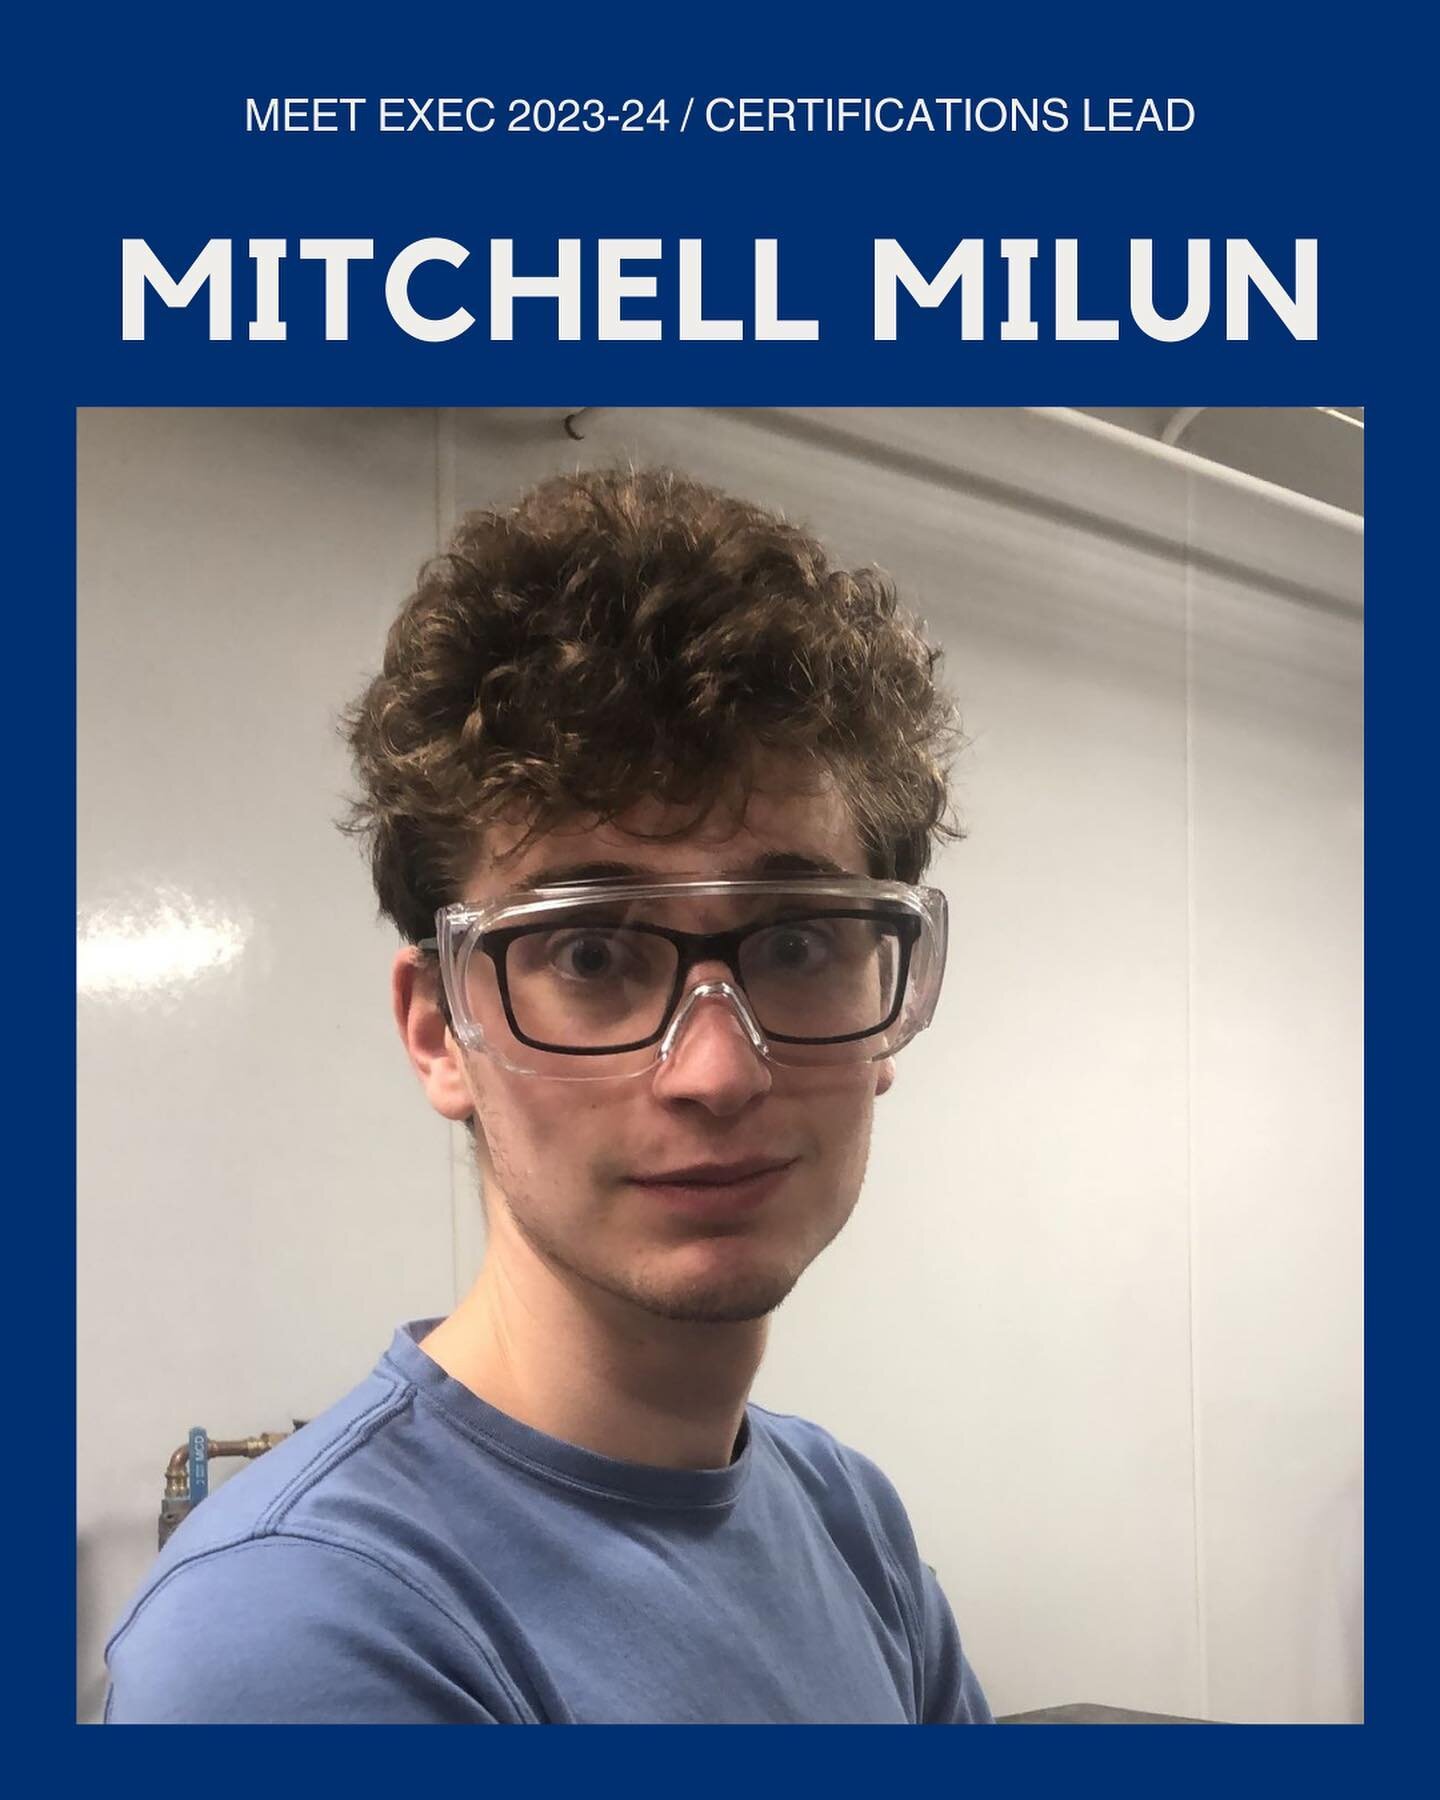 Another day, another chance to present more of our 2023-24 Executive Committee! Next up is our amazing Certifications Lead, Mitchell Milun!

With aerostructures and certification experience, sophomore Mitchell Milun looks to continue developing the c